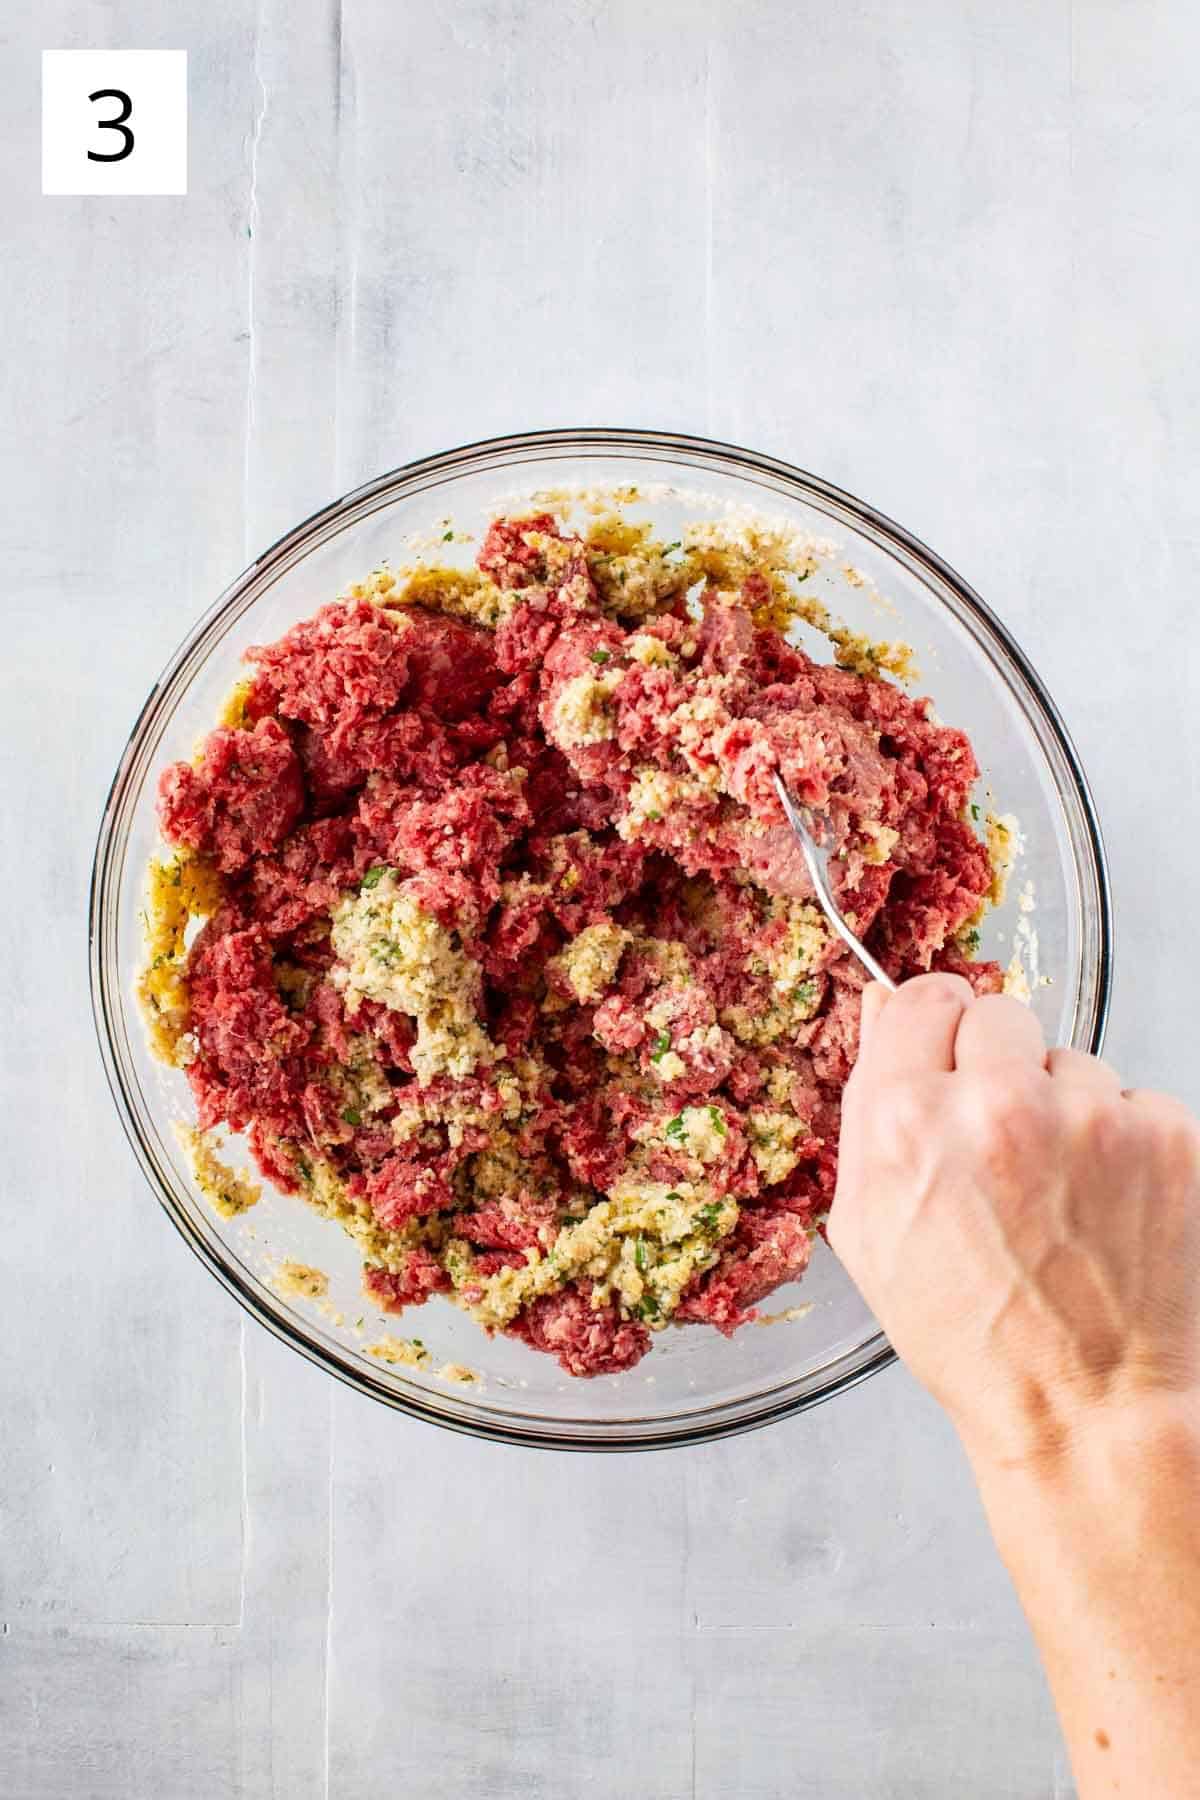 Adding ground meat to meatball mixture.